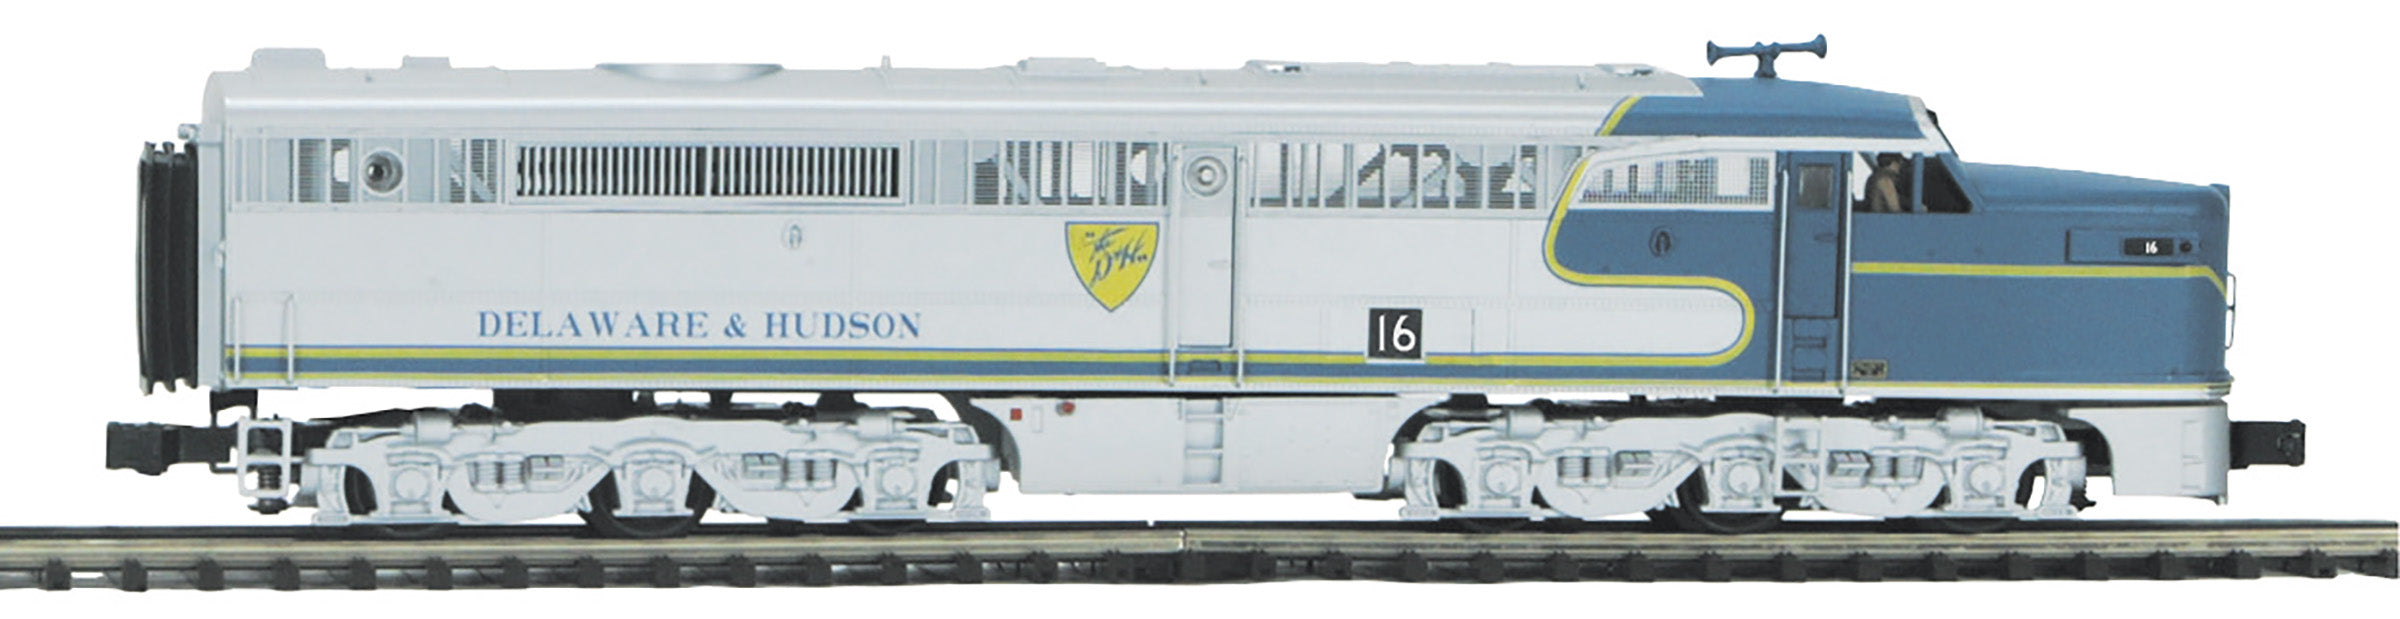 MTH 20-21870-1 - Alco PA A Unit Diesel Locomotive "Delaware & Hudson" #16 w/ PS3 (Plated)